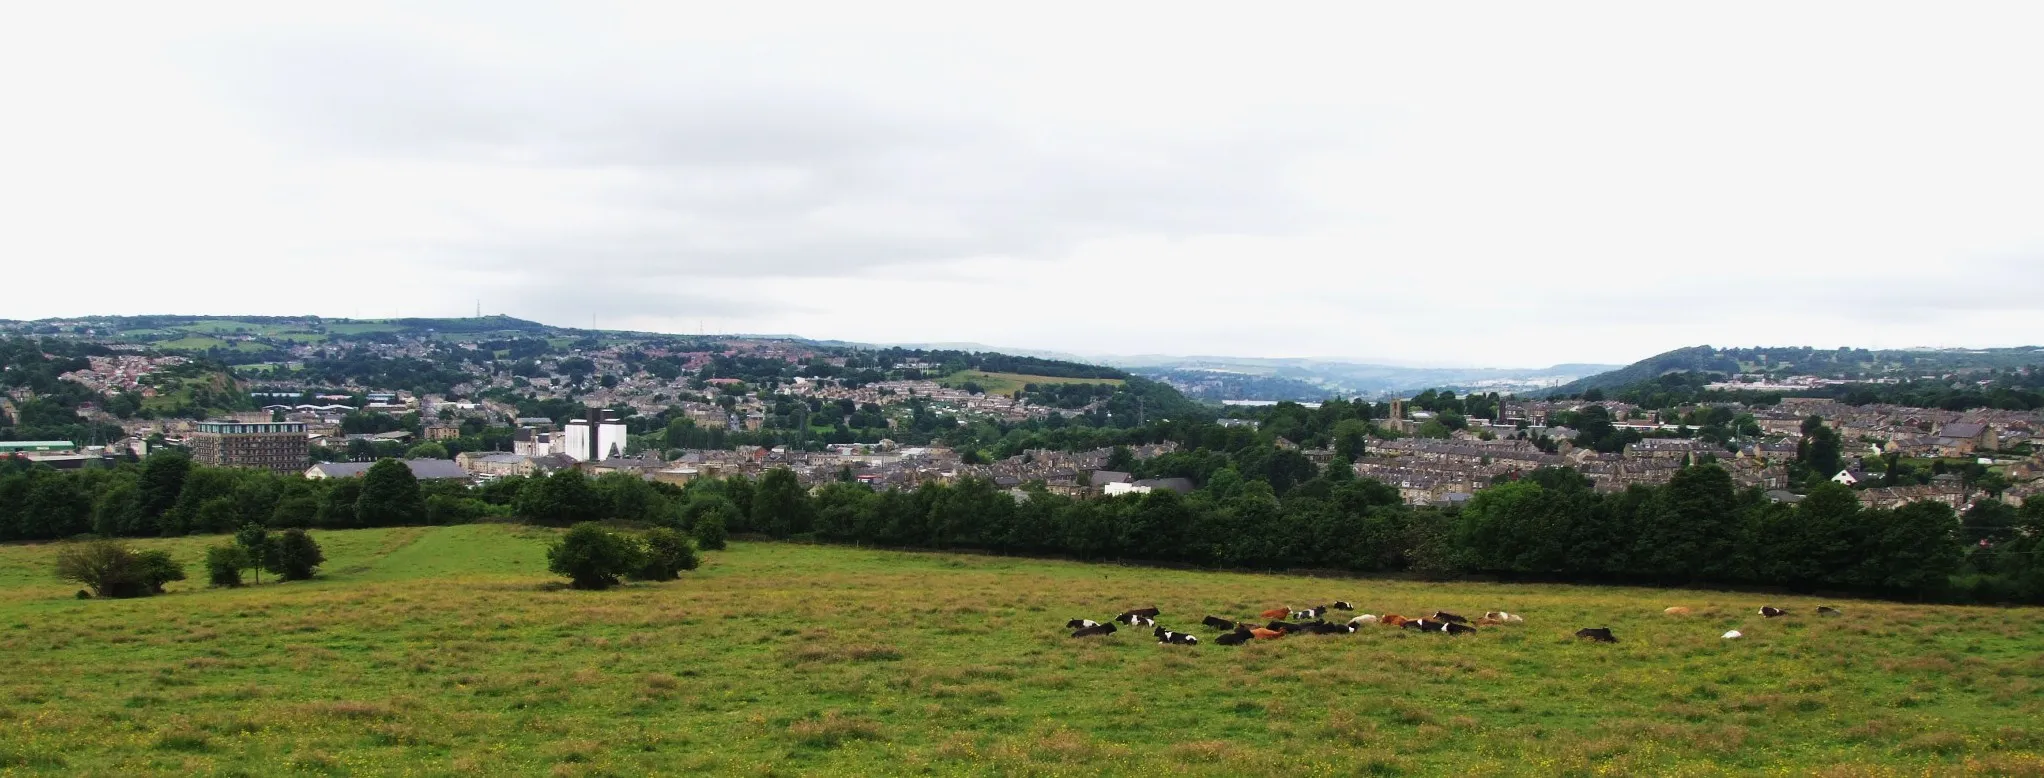 Photo showing: View of Brighouse in Calderdale, West Yorkshire, England. Phot taken from Thornhill Lane overlooking the town from the east.